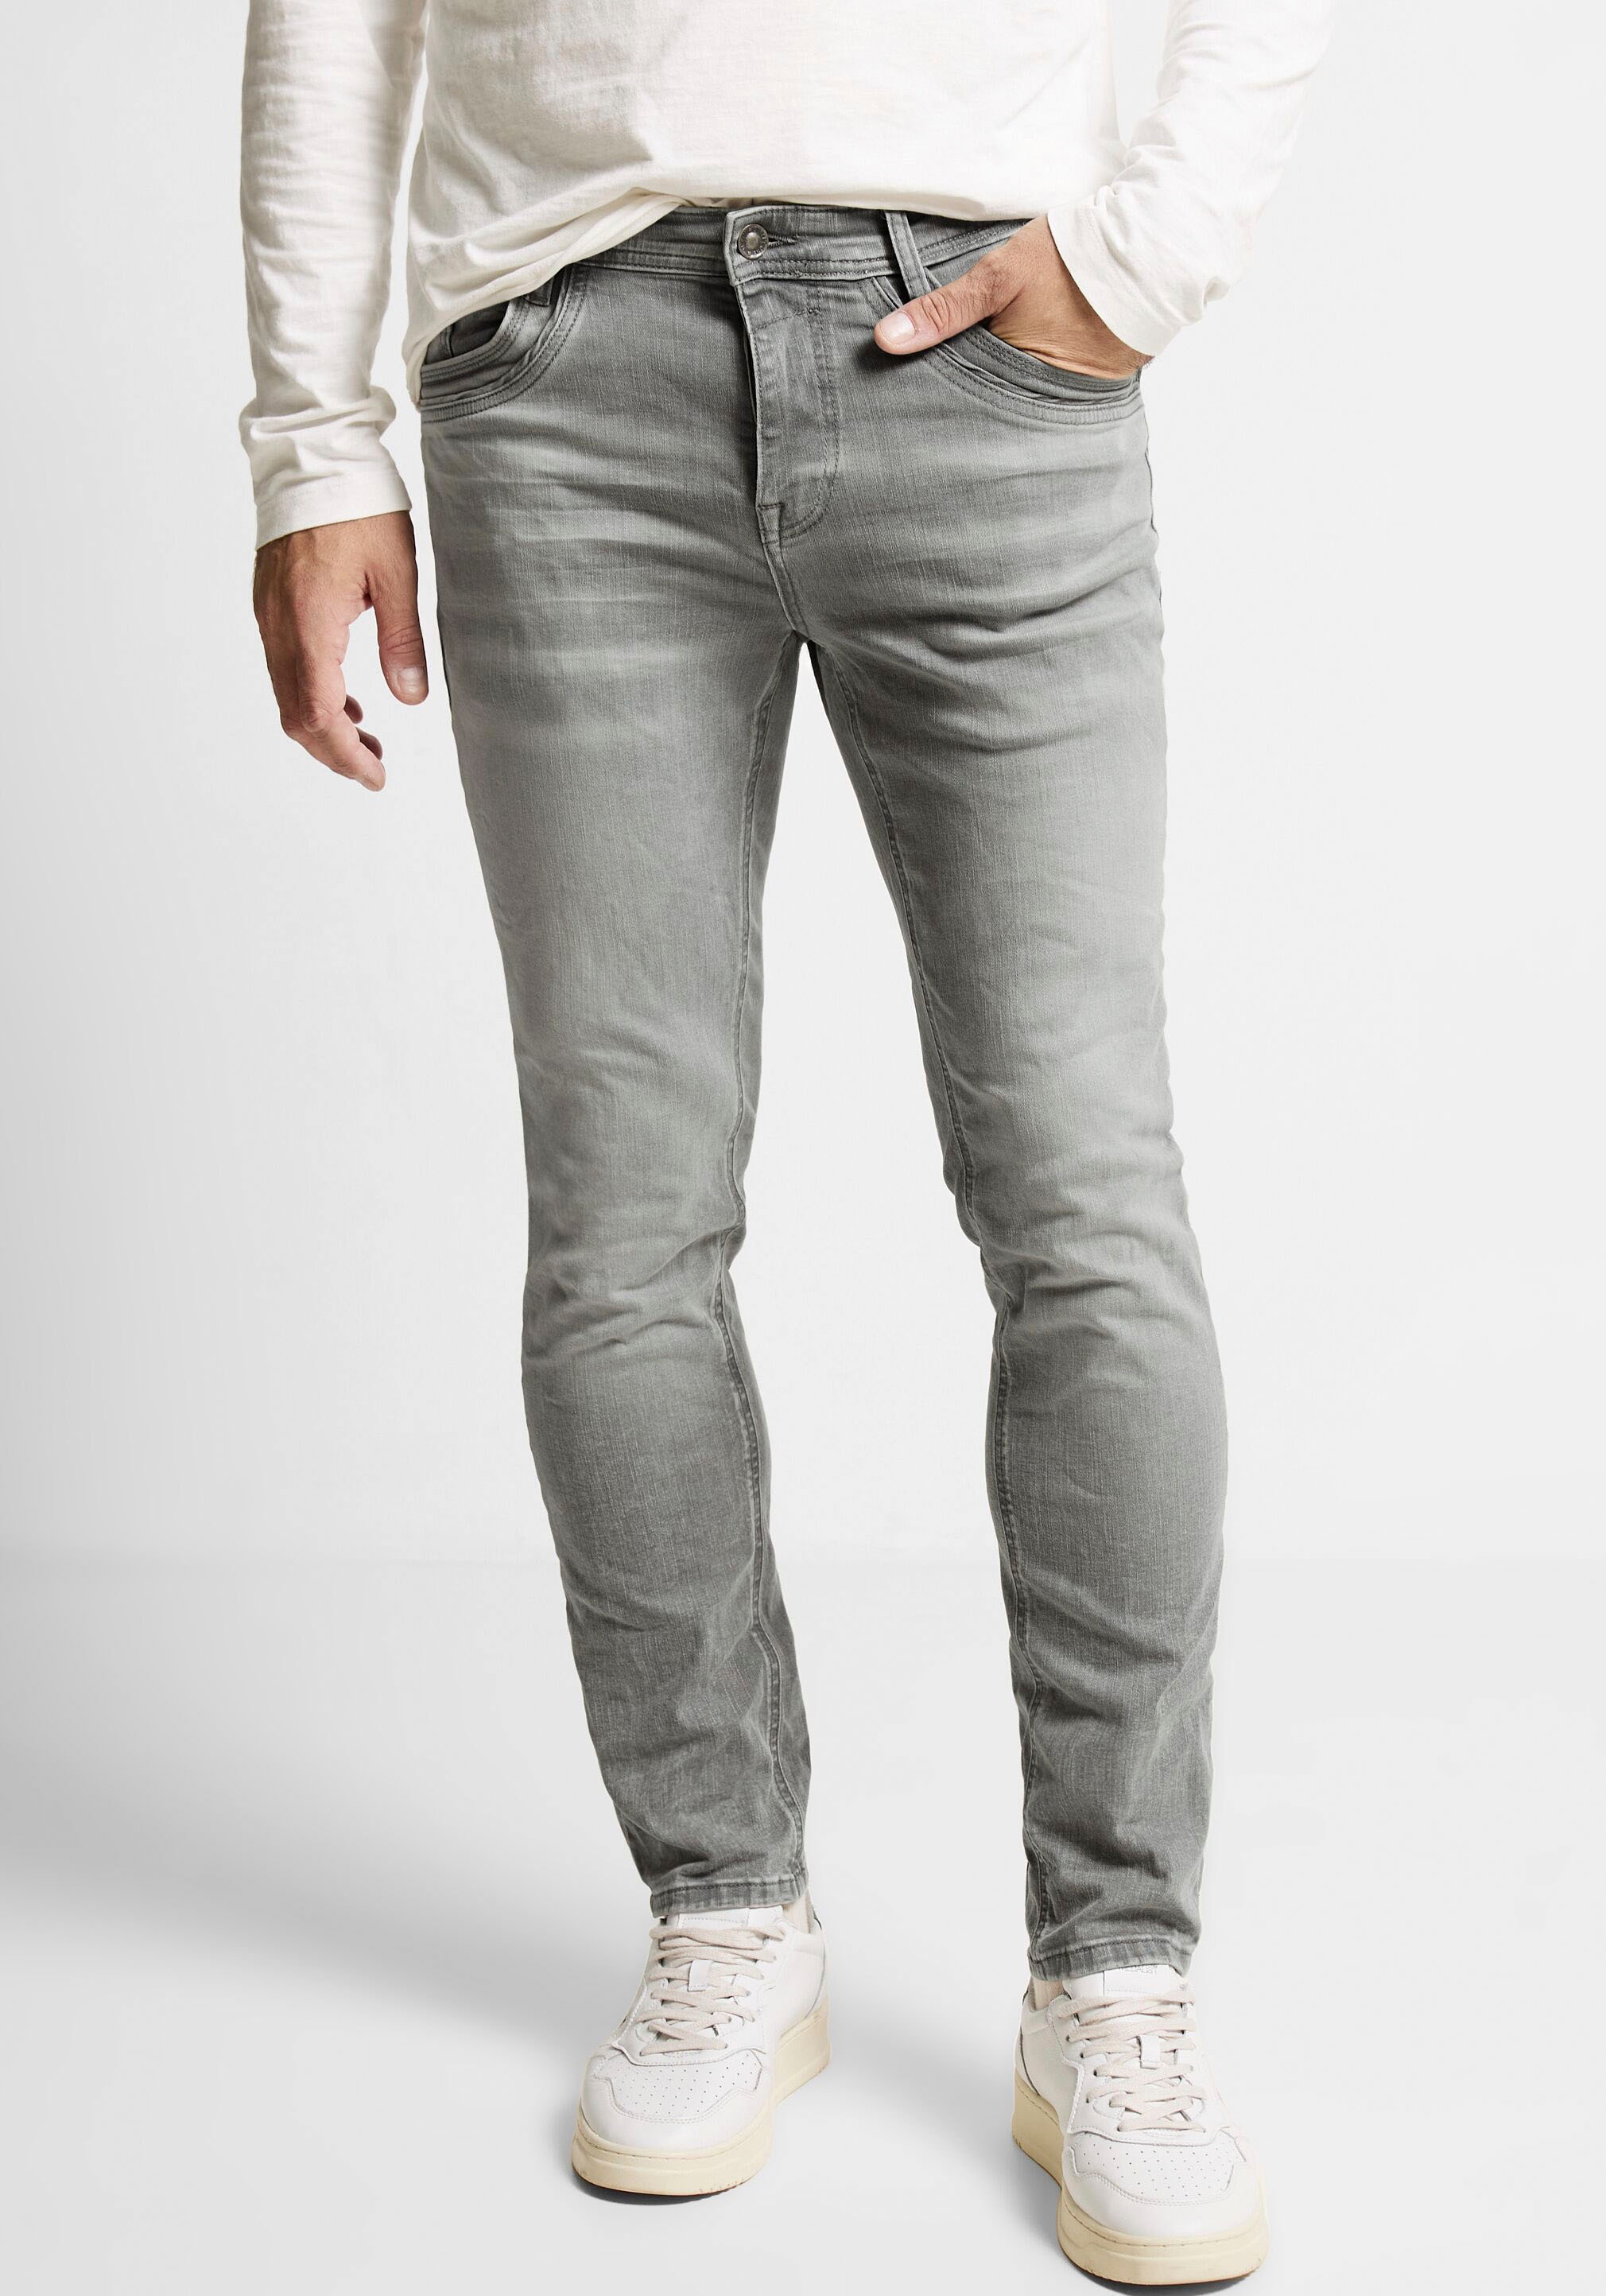 Slim-fit-Jeans, in grauer Waschung